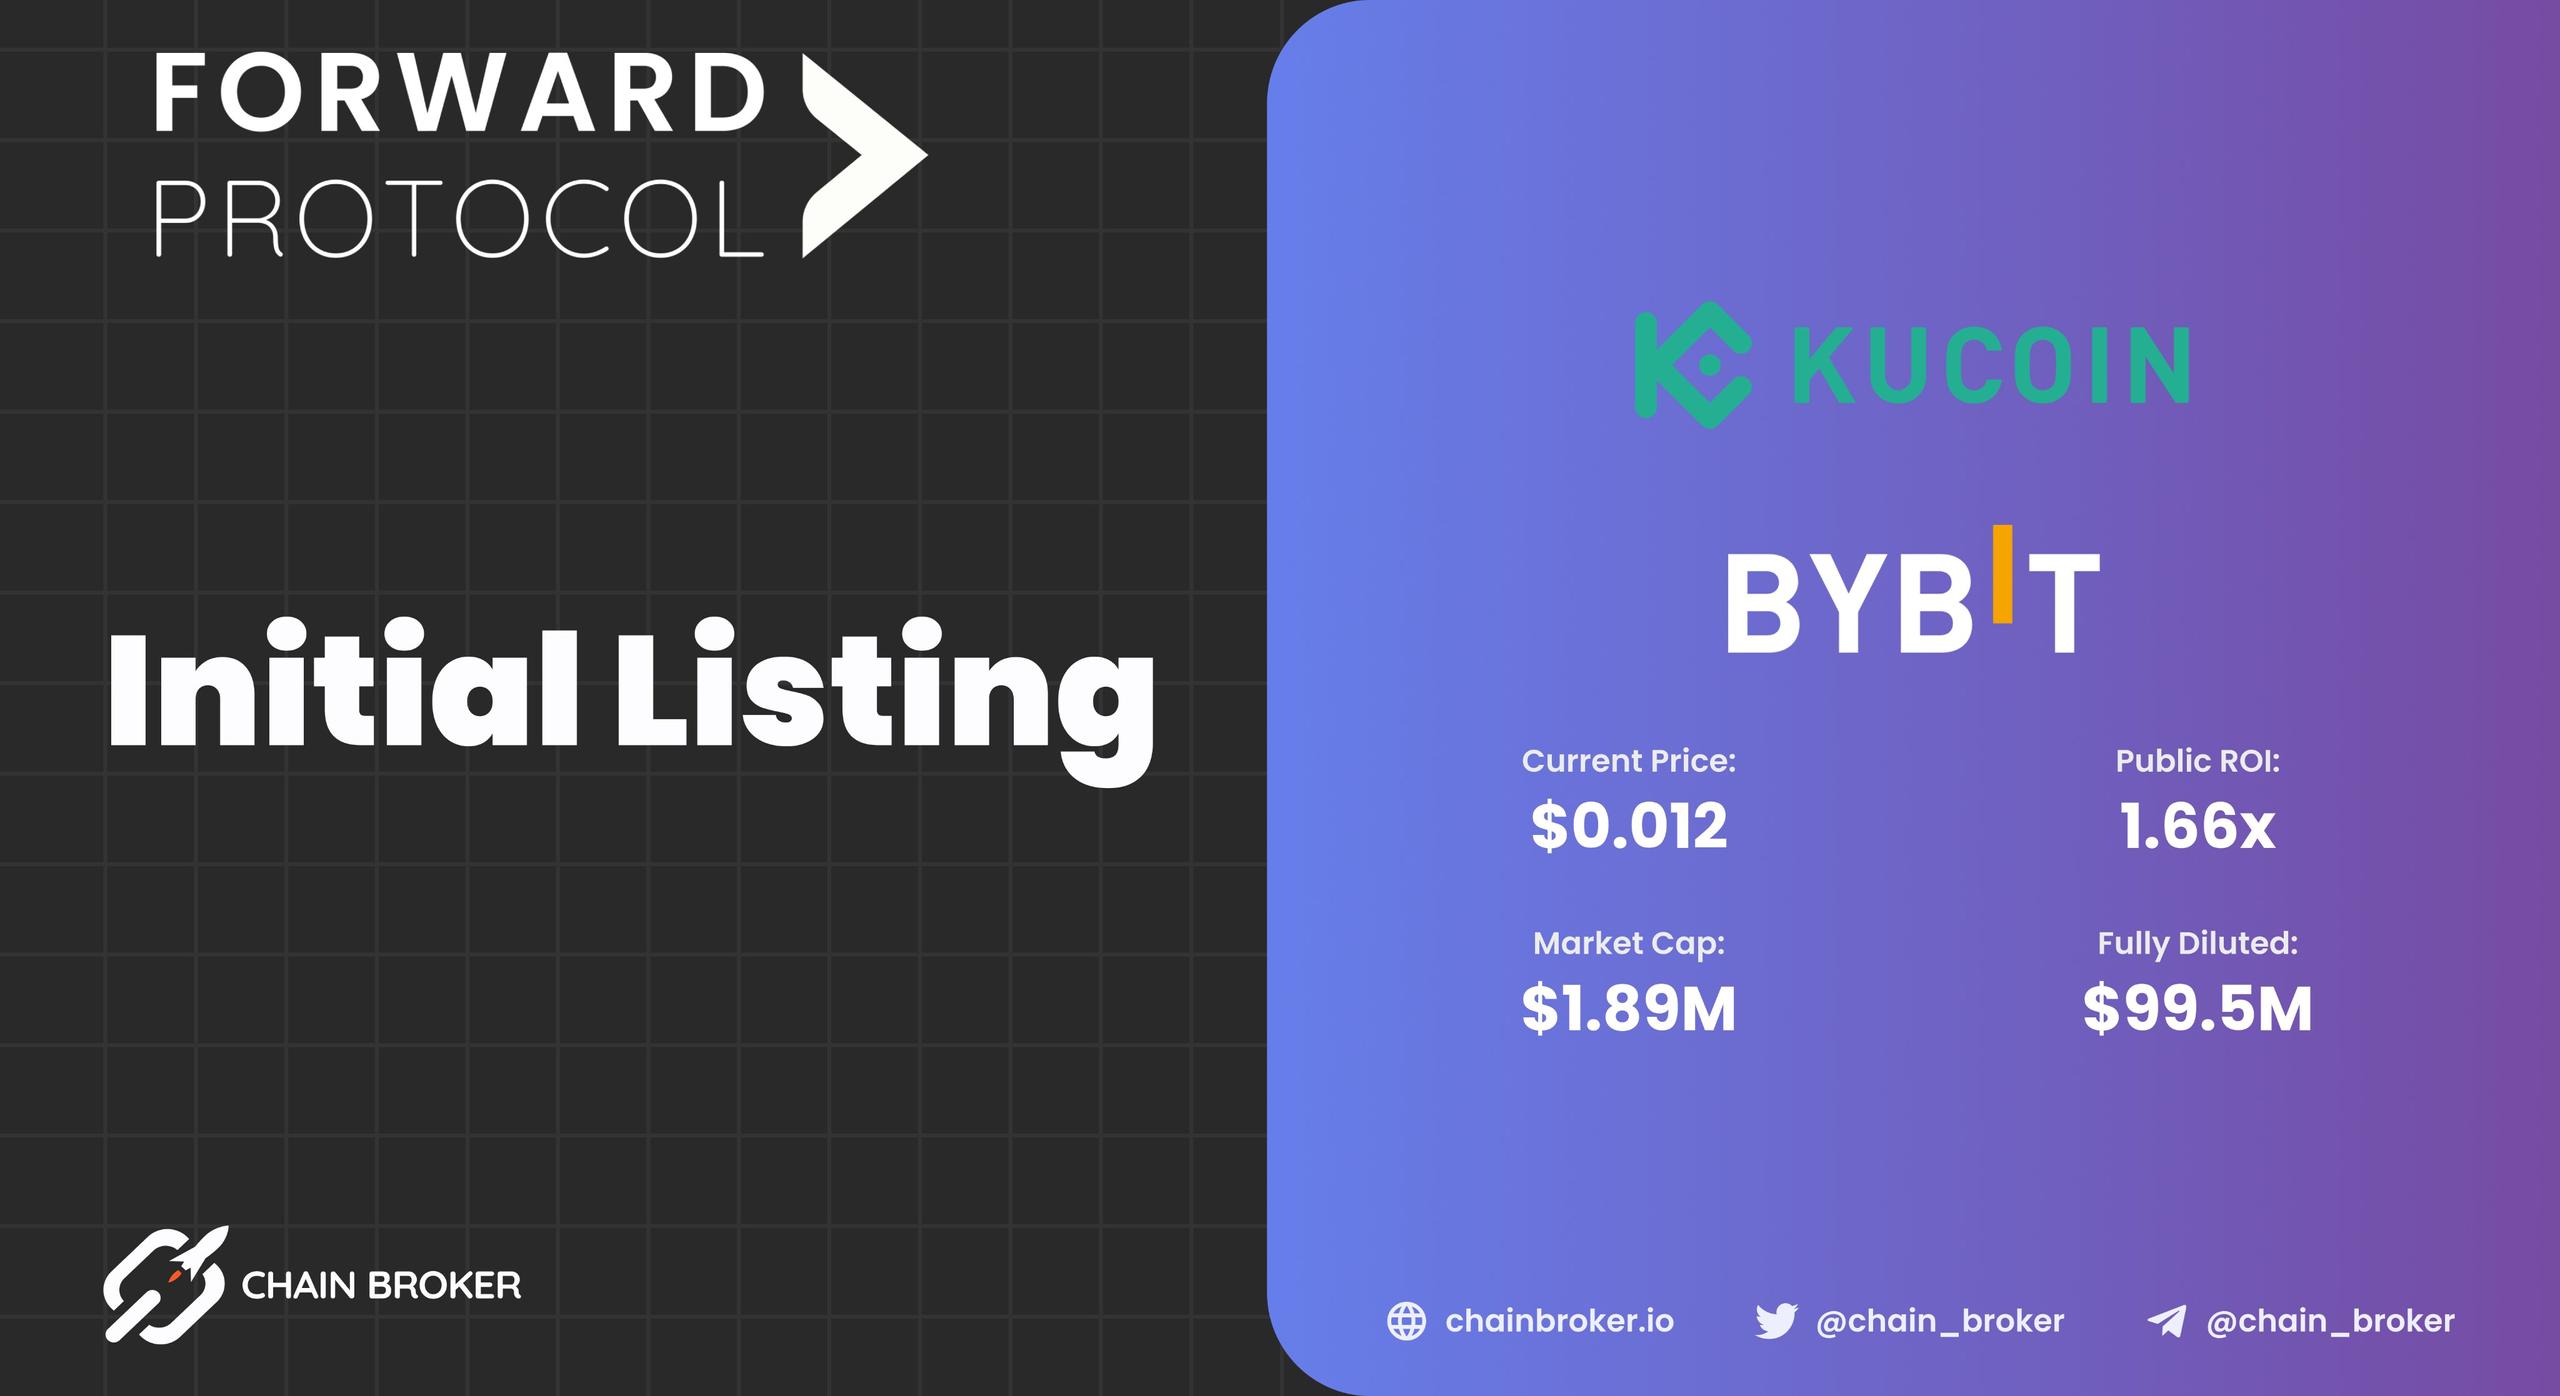 Forward Protocol has been listed on Kucoin and Bybit